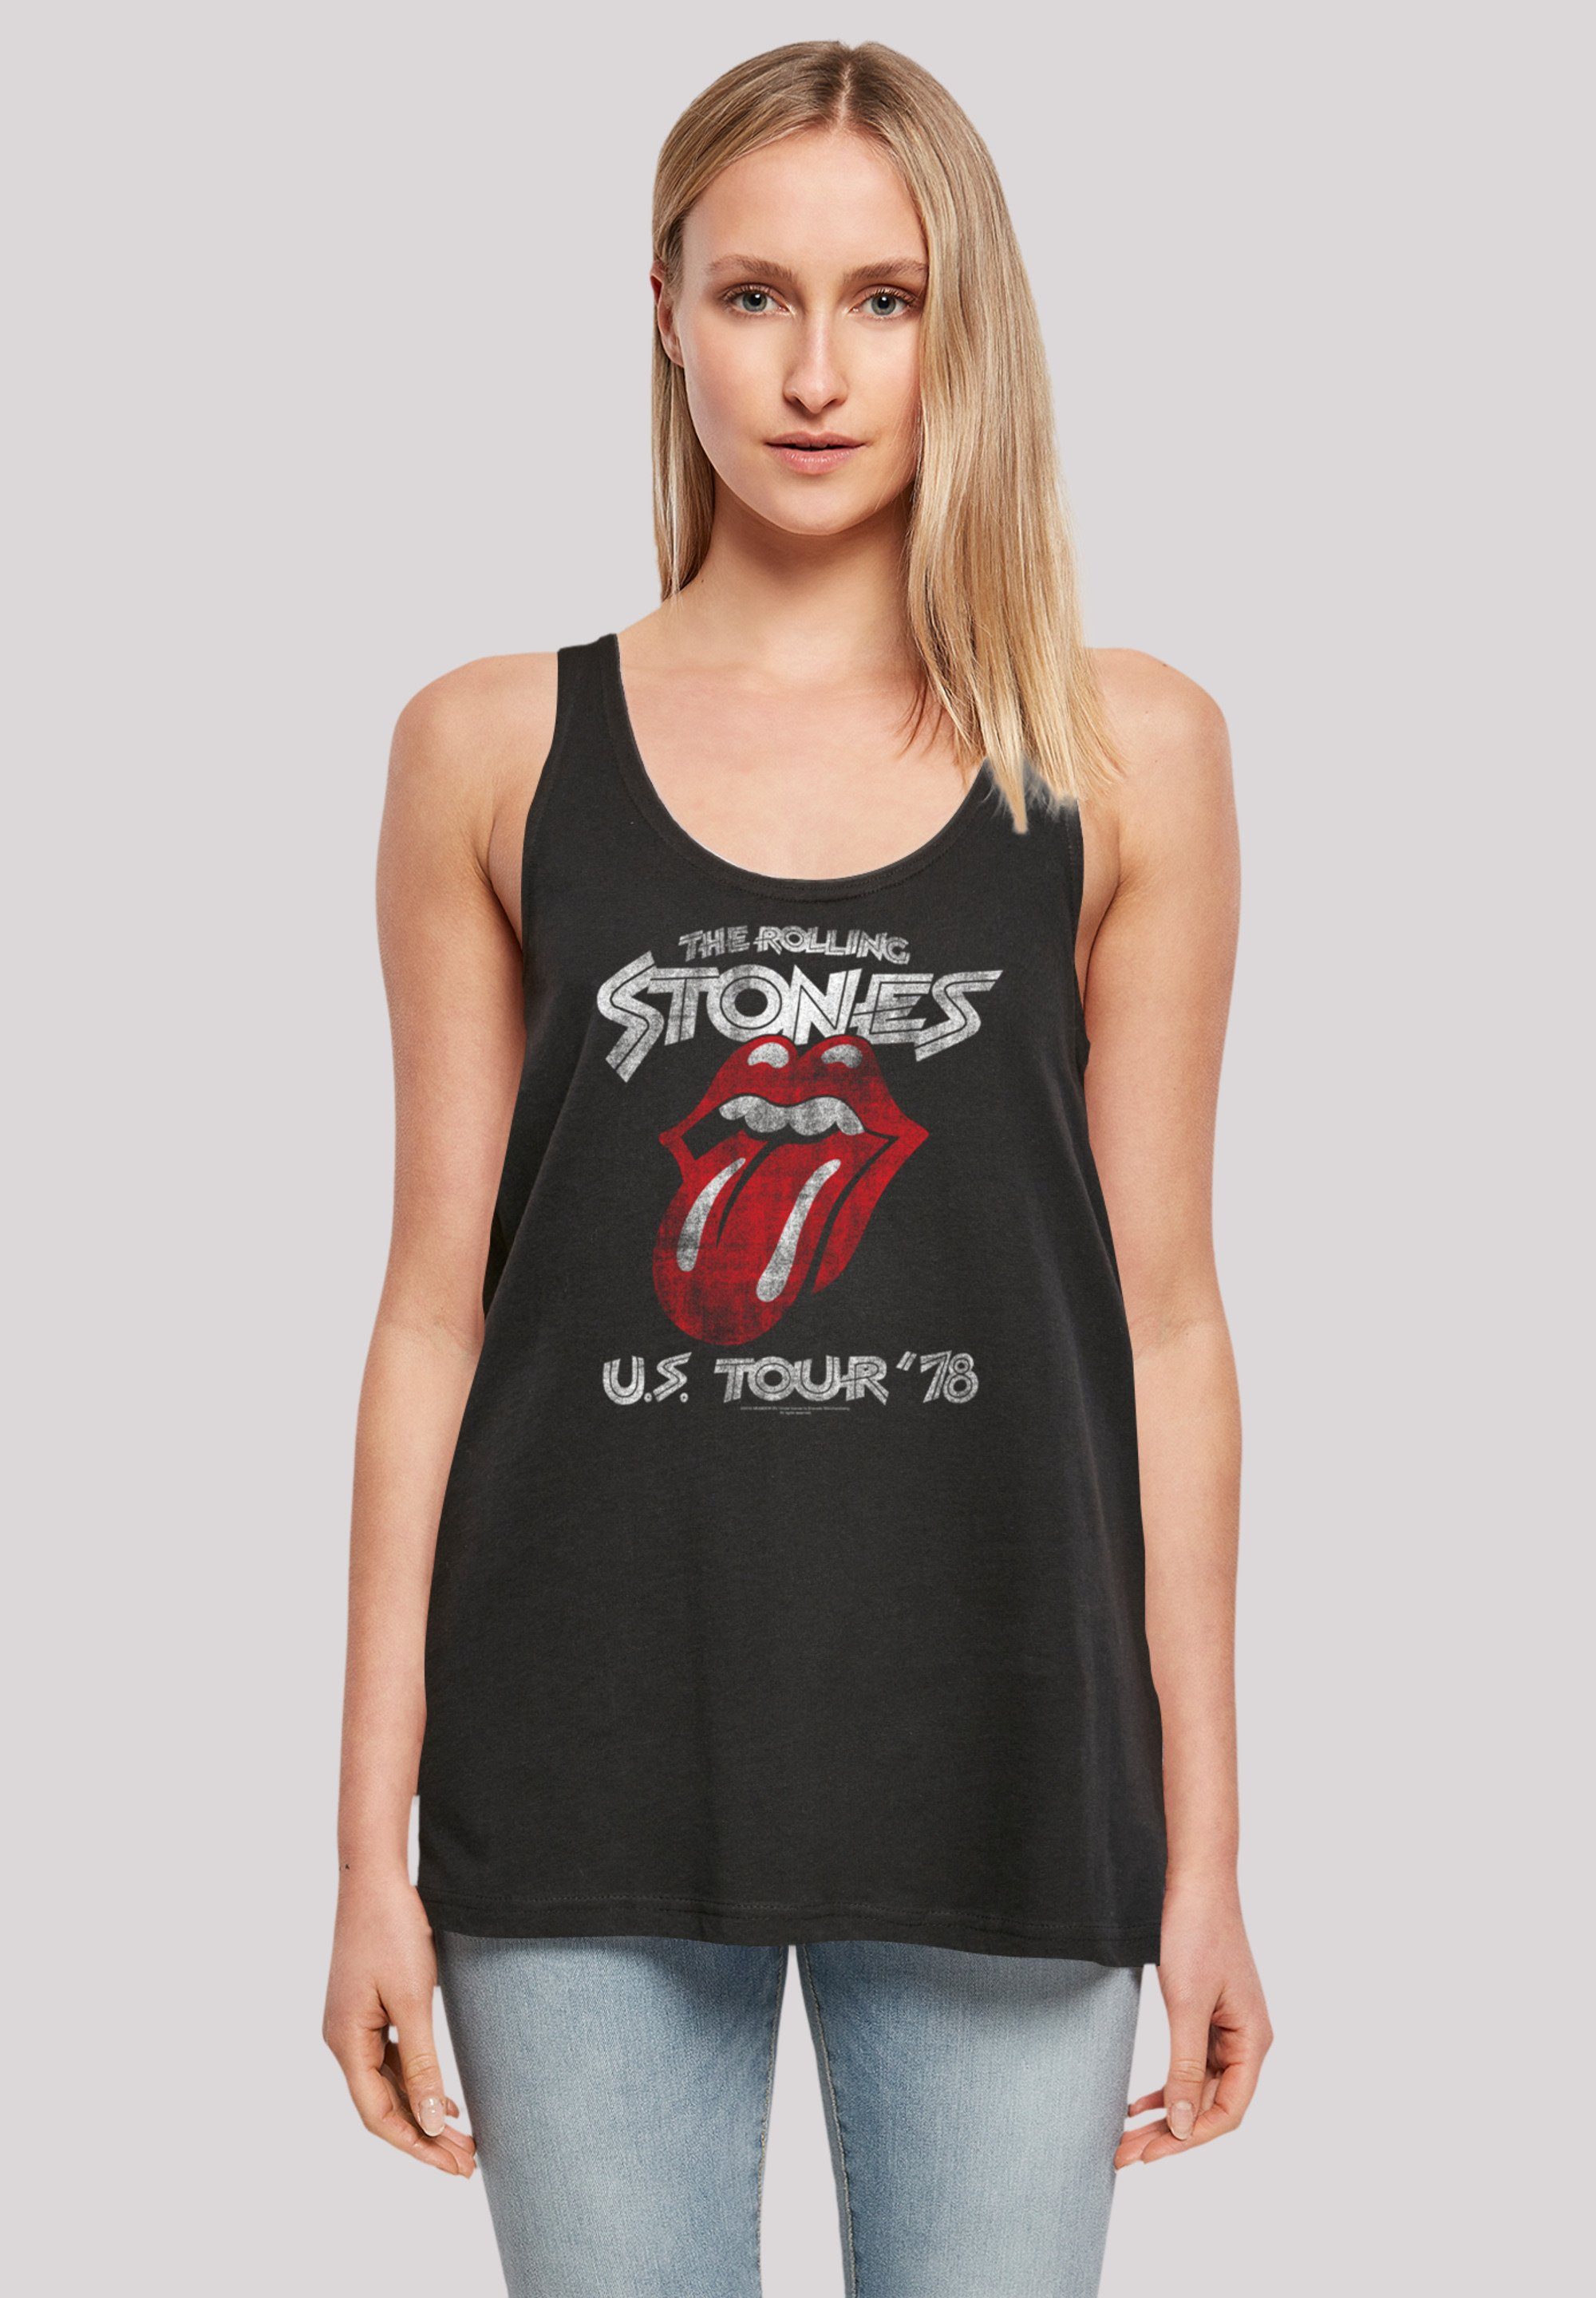 F4NT4STIC T-Shirt The Rolling Stones US Tour \'78 Print, Offiziell  lizenziertes The Rolling Stones Tanktop